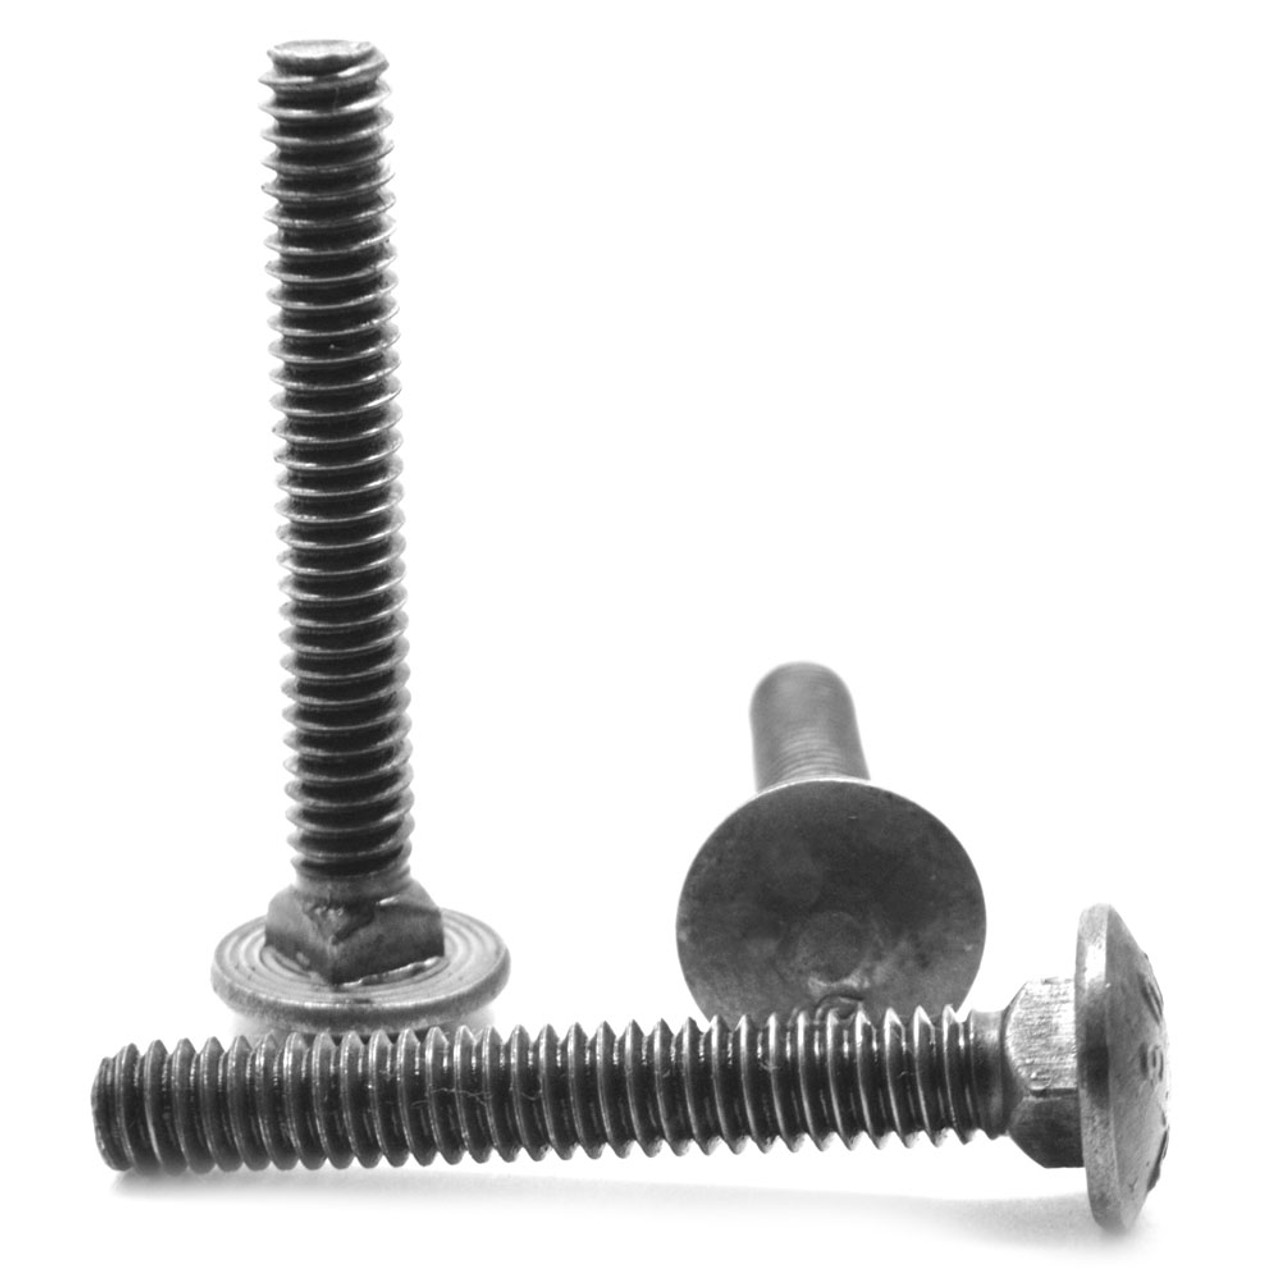 1/4"-20 x 4 1/2" (FT) Coarse Thread A307 Grade A Carriage Bolt Low Carbon Steel Plain Finish